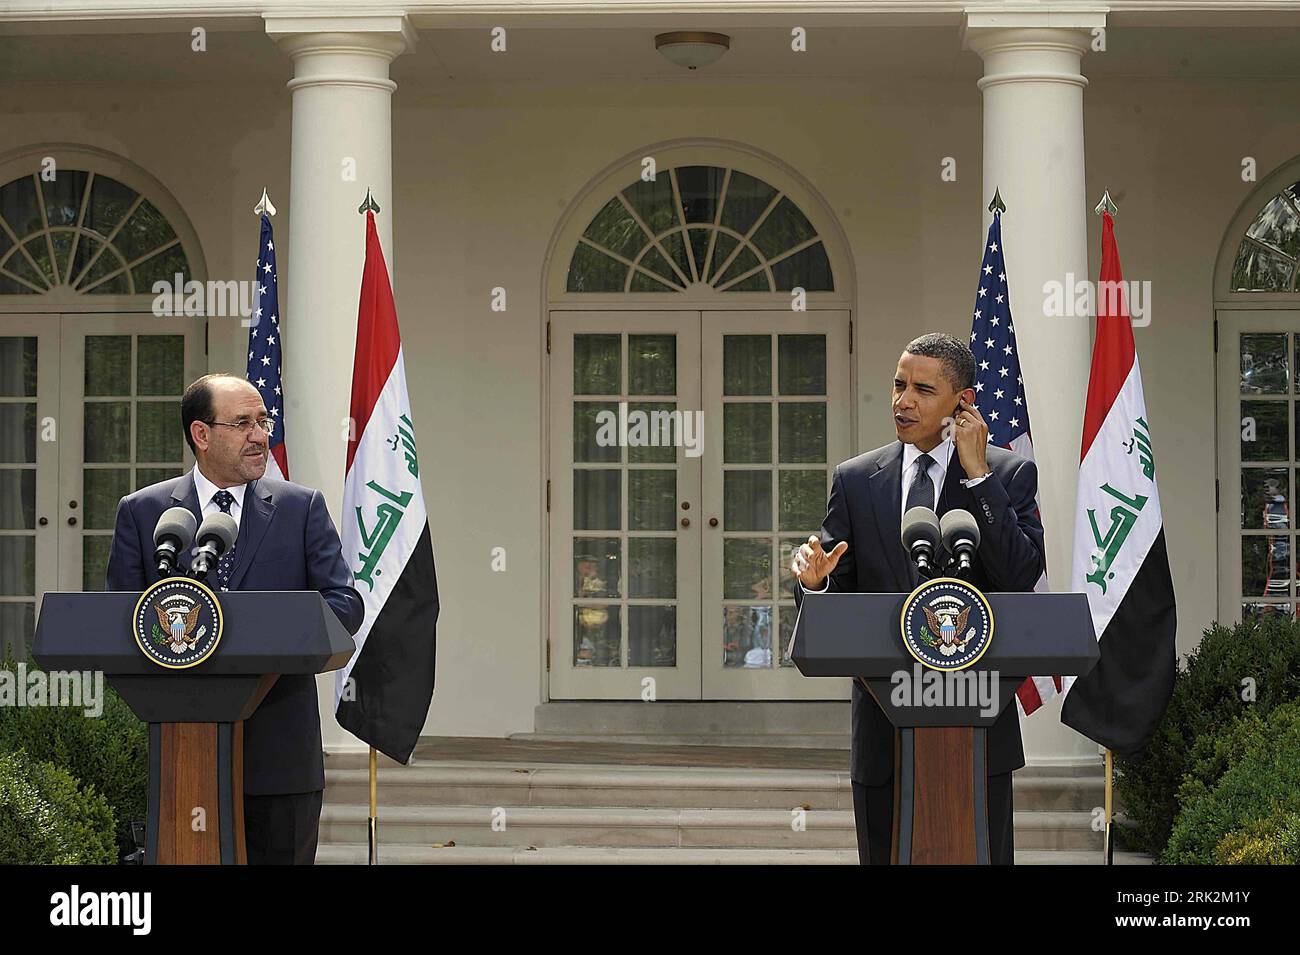 090722 -- WASHINGTON, July 22, 2009 Xinhua -- US President Barack Obama R and Iraqi Prime Minister Nouri al-Maliki hold a joint press conference in the Rose Garden at the White House in Washington, DC, July 22, 2009. This is the first meeting between Maliki and Obama since US troops withdrew from Iraqi cities at the end of June. Xinhua/Zhang Yan 1US-IRAQ-OBAMA-MALIKI-PRESS CONFERENCE  PUBLICATIONxNOTxINxCHN Stock Photo